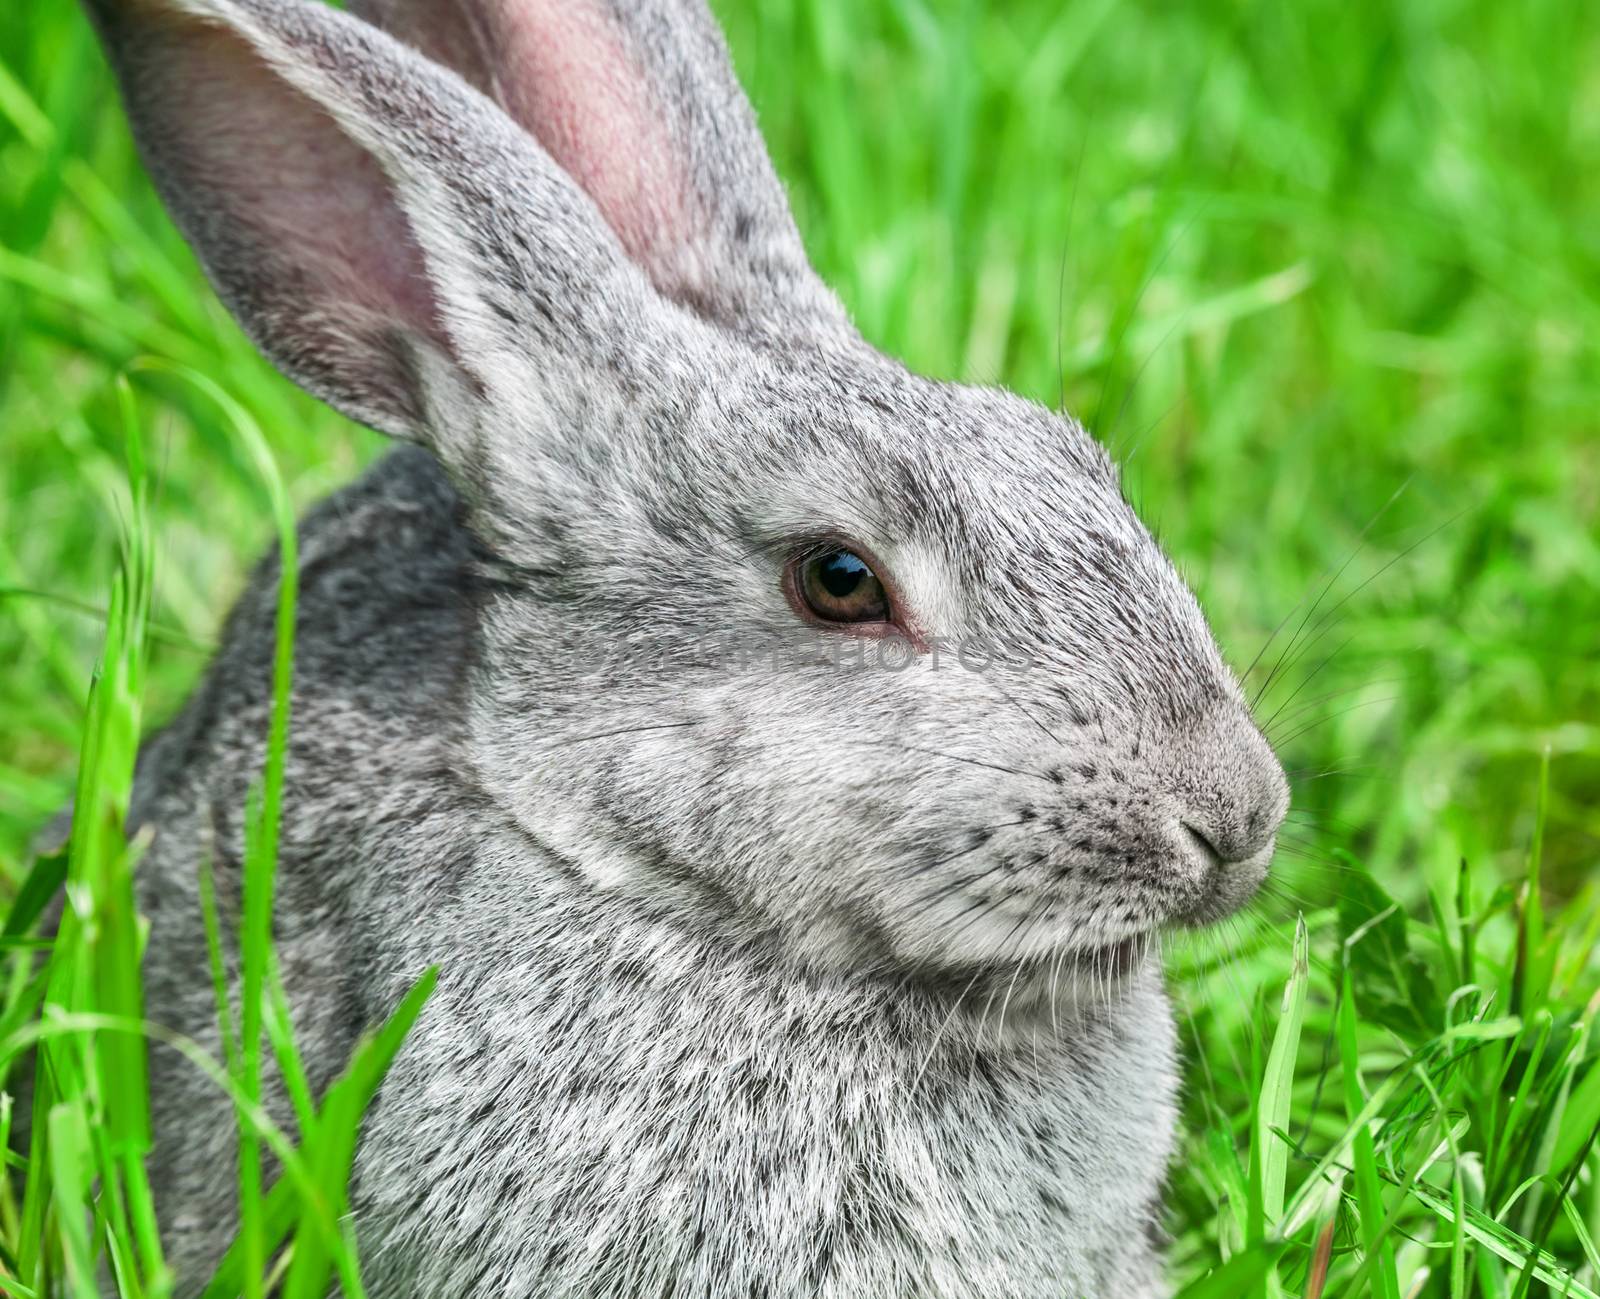 Rabbit sitting in grass, smiling at camera